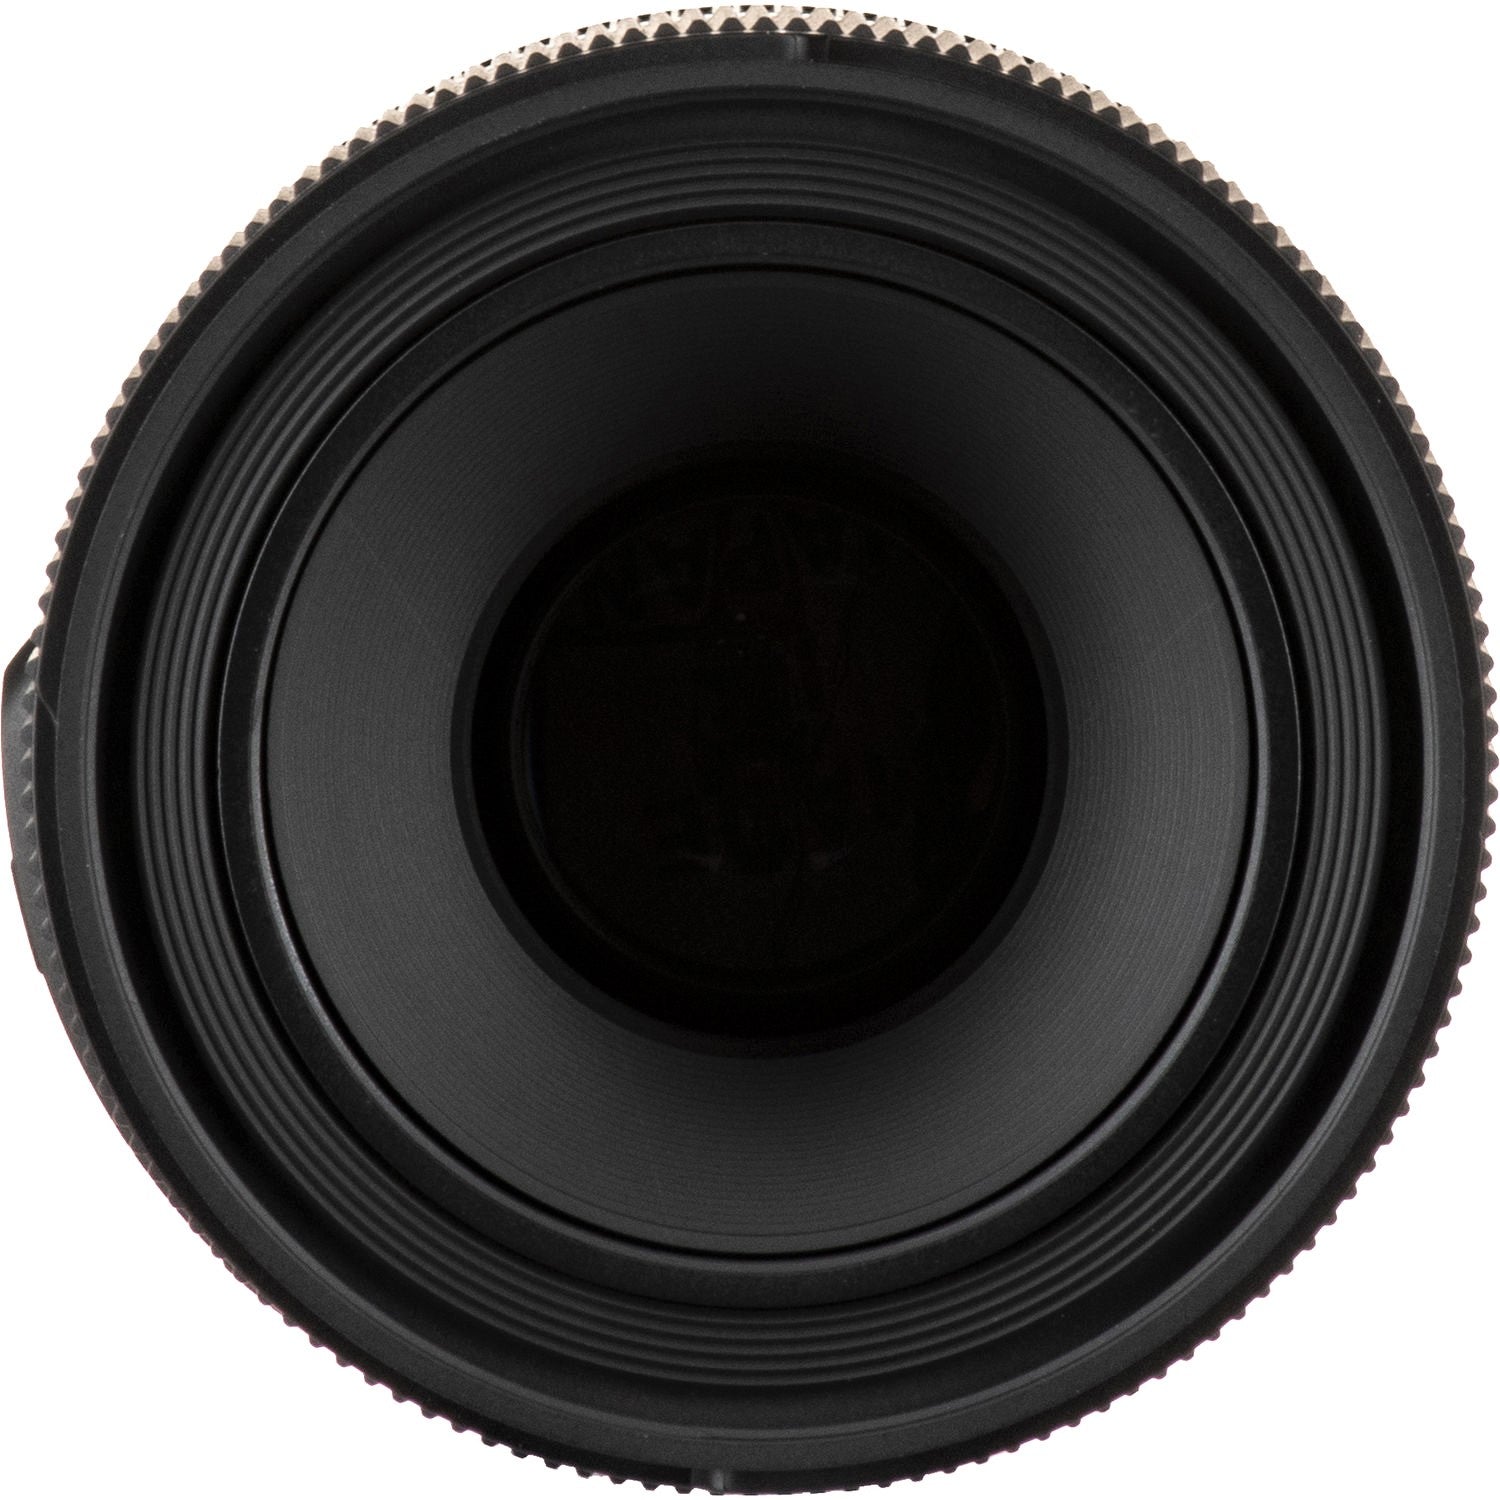 Sigma 70mm F2.8 DG Macro Art Lens for Leica L in a Front Close-Up View